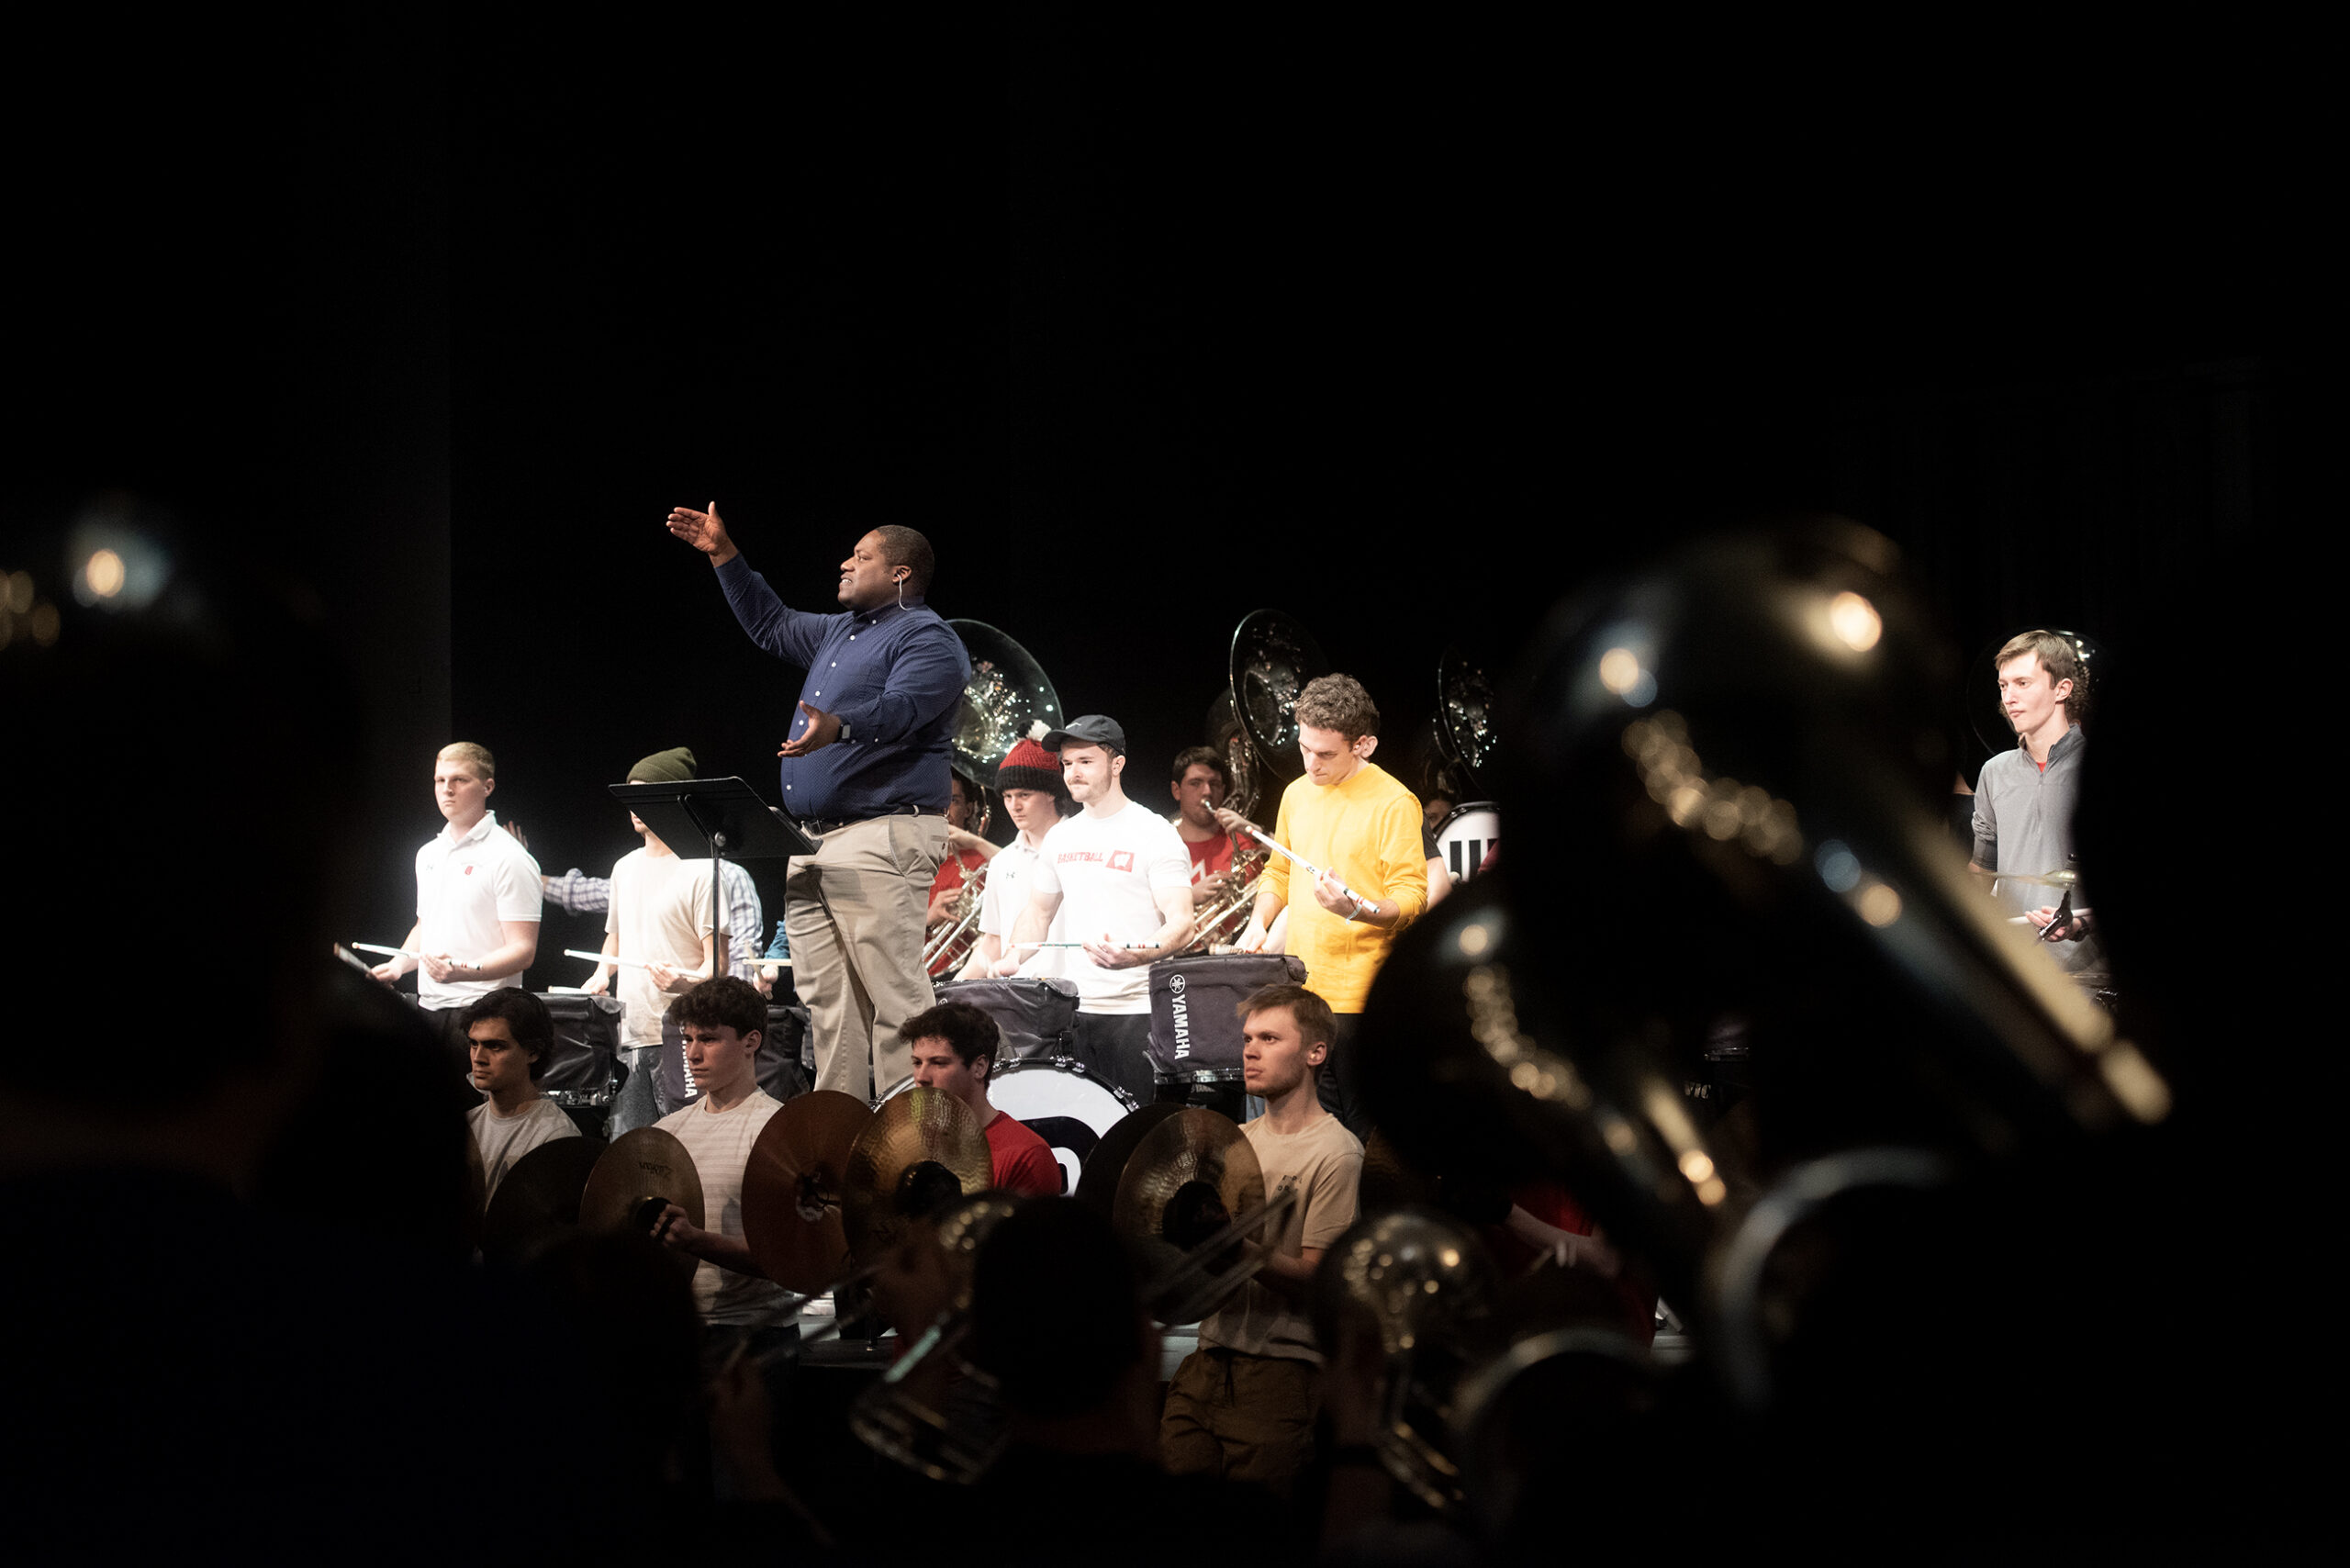 A director waves his arms as students play instruments in a theater.